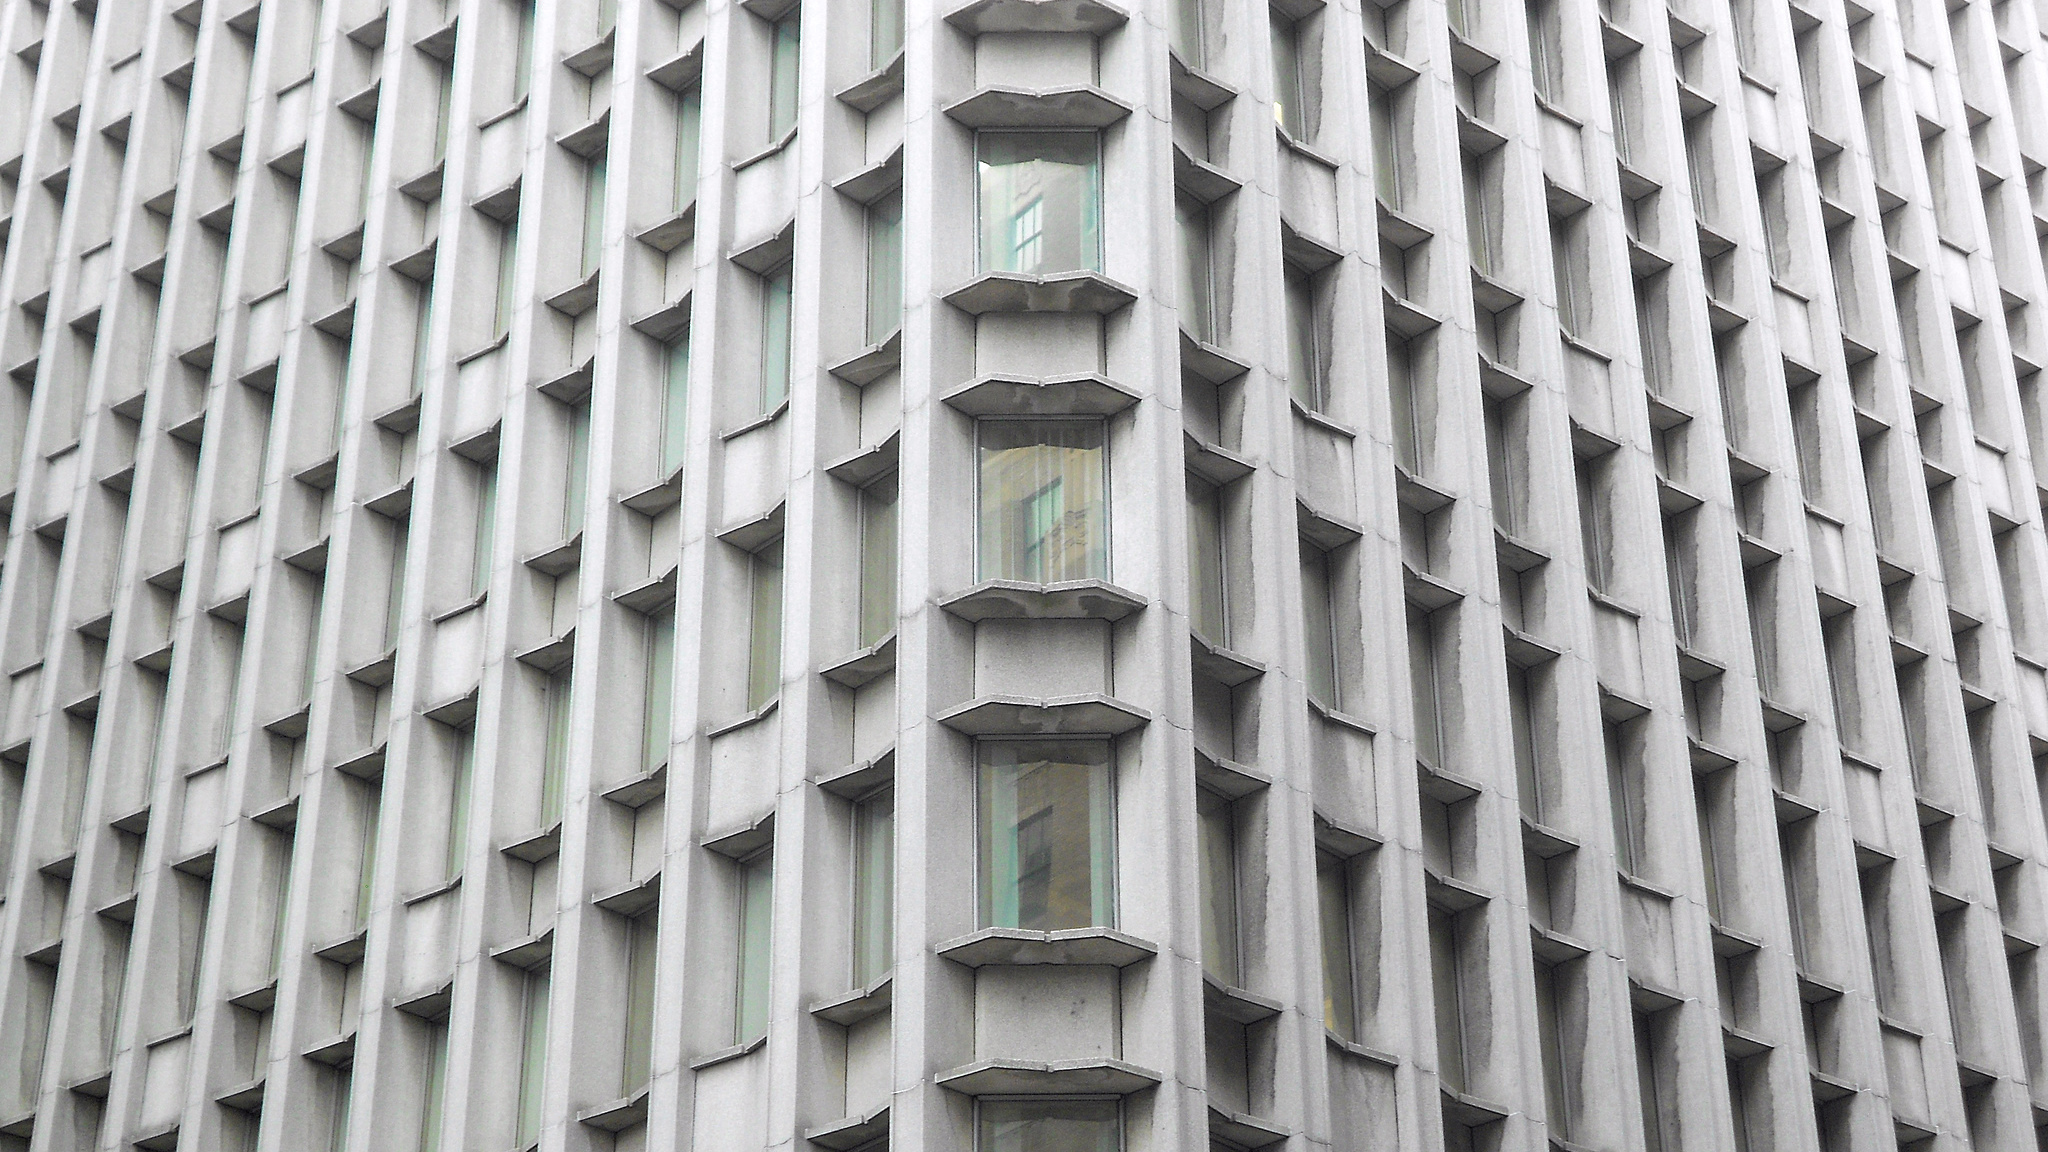 Photo of the angled grid-pattern of windows radiating out from the corner of the Blue Cross Blue Shield building in Boston